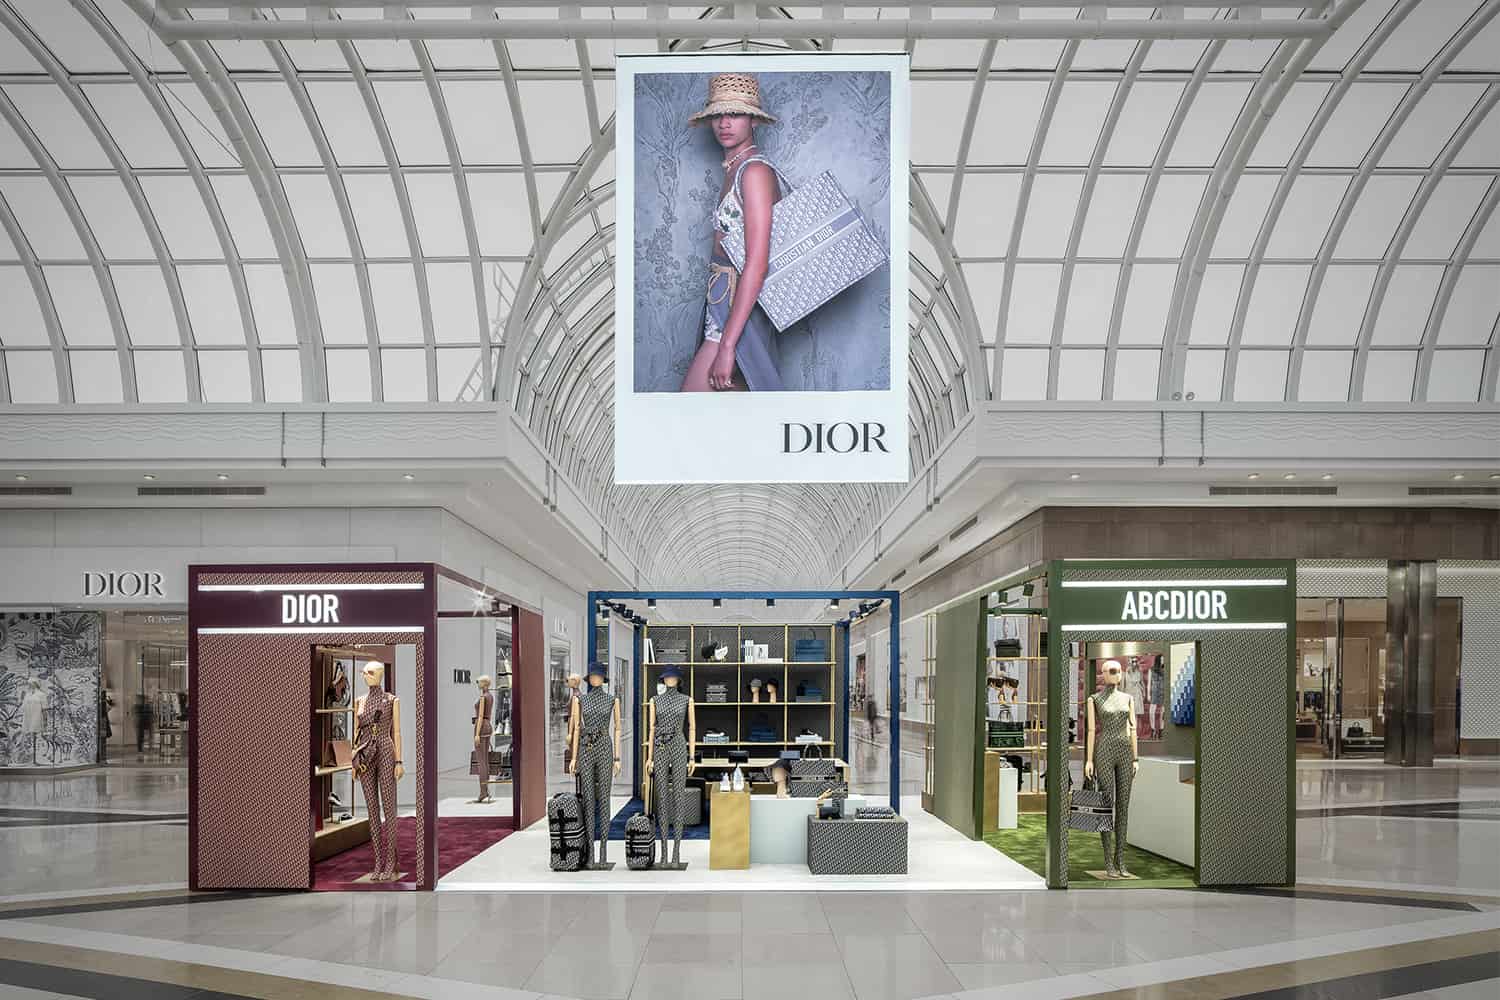 Dior at Chadstone Pop Up Brand Activation by Expocenrtic.com.au